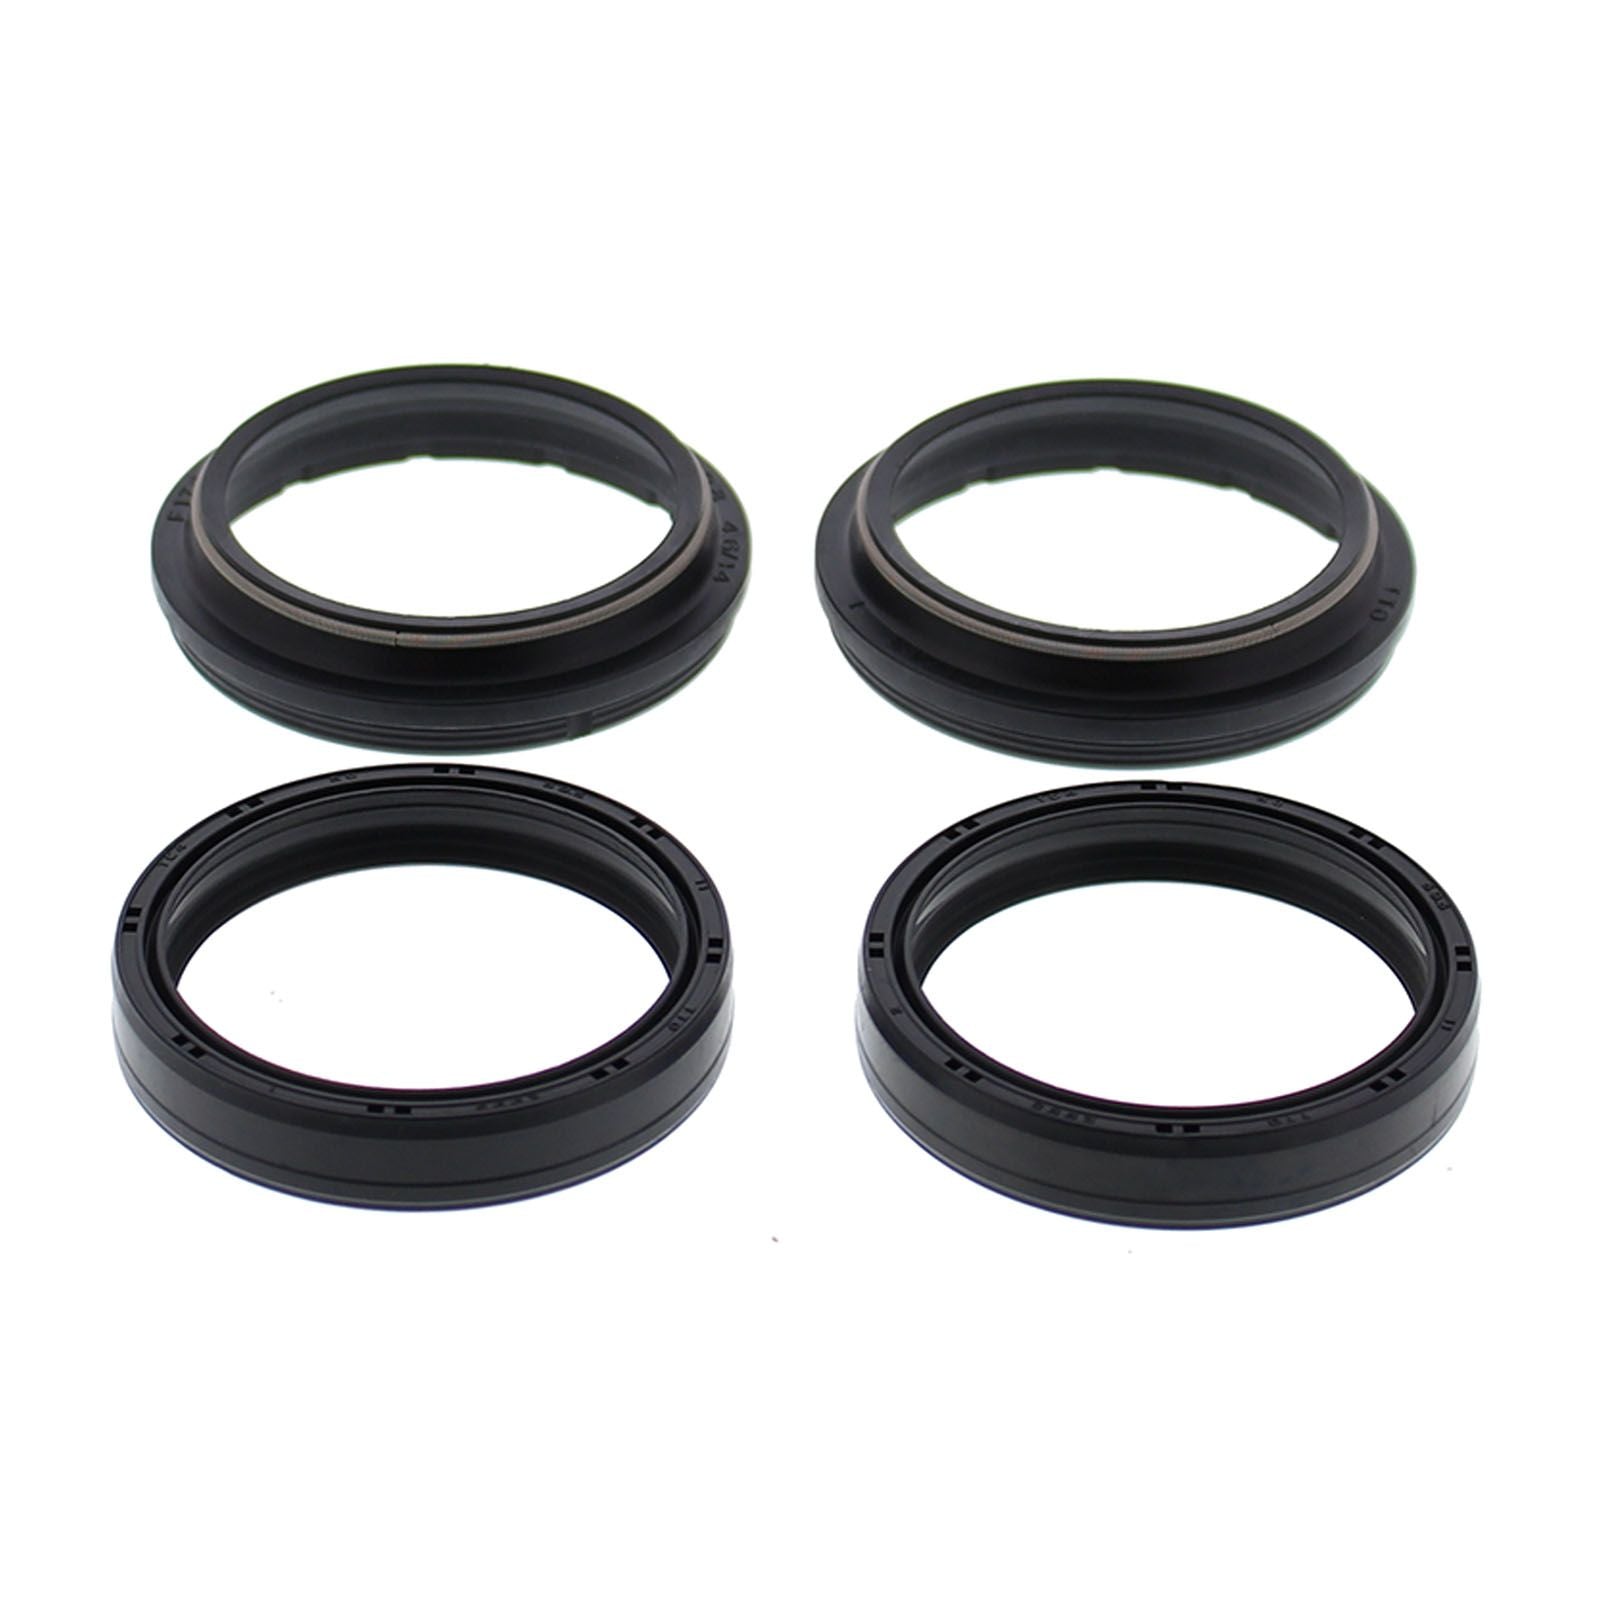 New ALL BALLS Racing Fork Oil and Dust Seal Kit #AB56189